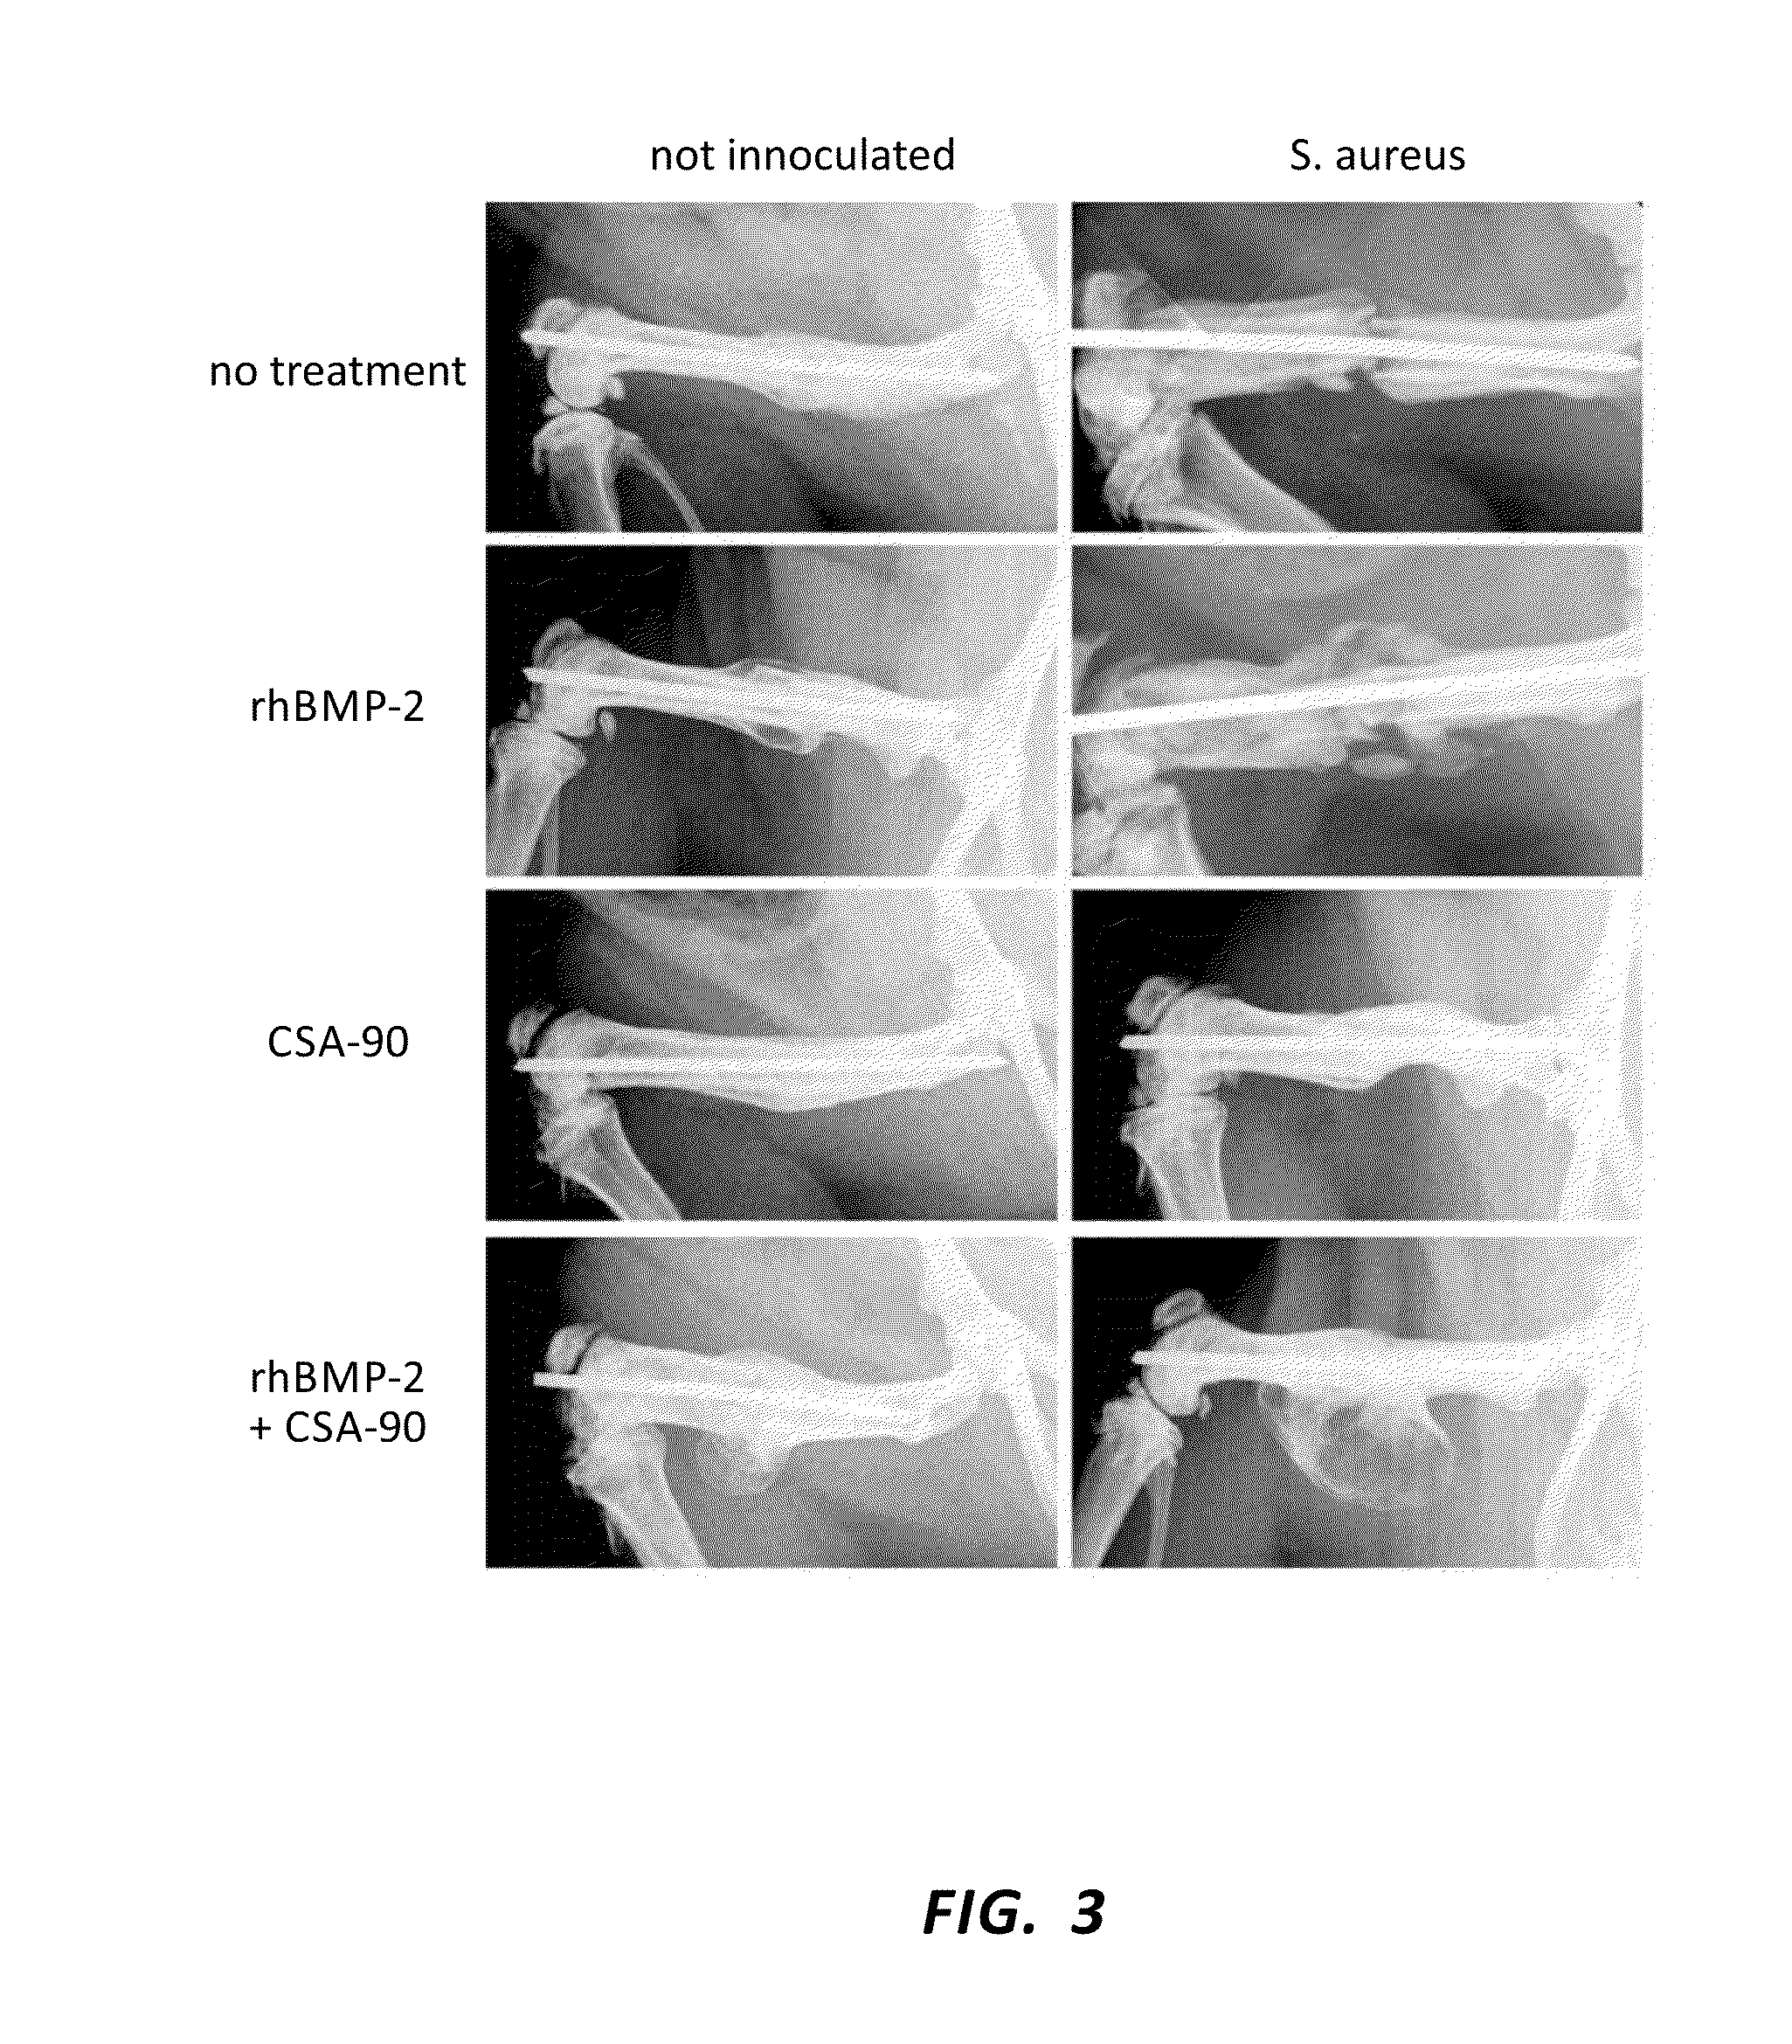 Anti-infective and osteogenic compositions and methods of use